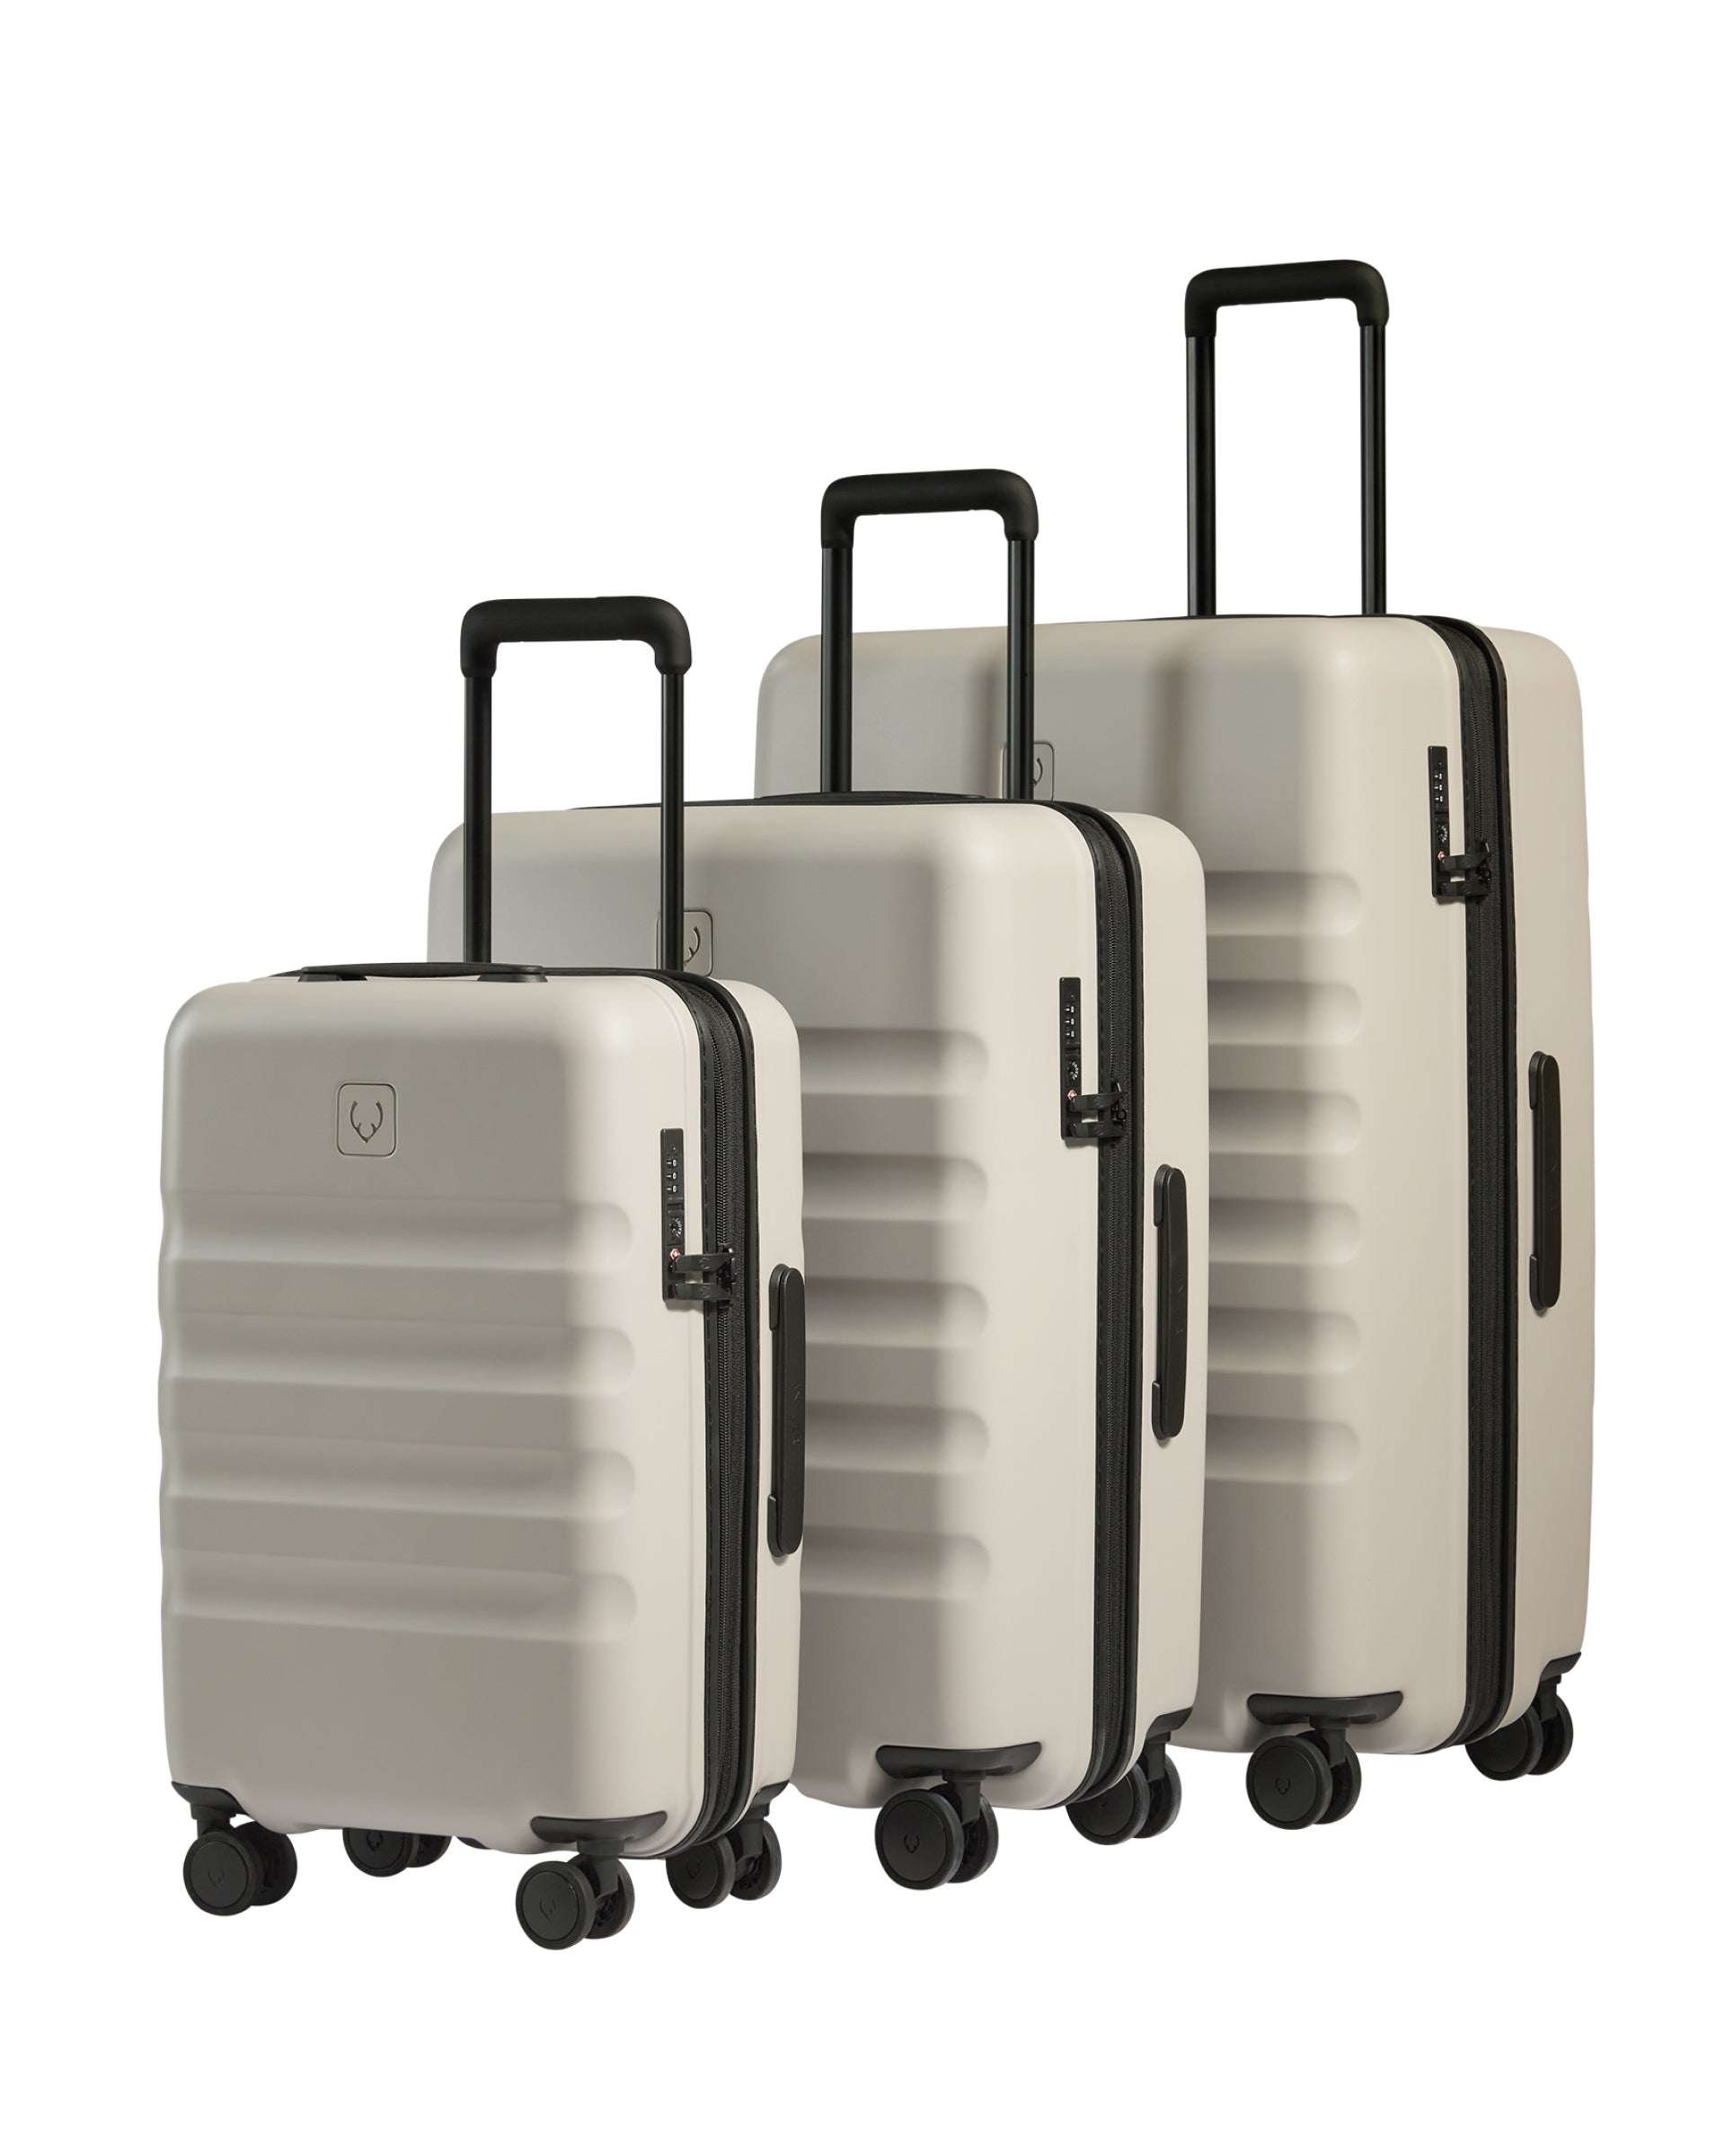 View Antler Icon Stripe Suitcase Set With Expander Cabin Suitcase In Taupe information